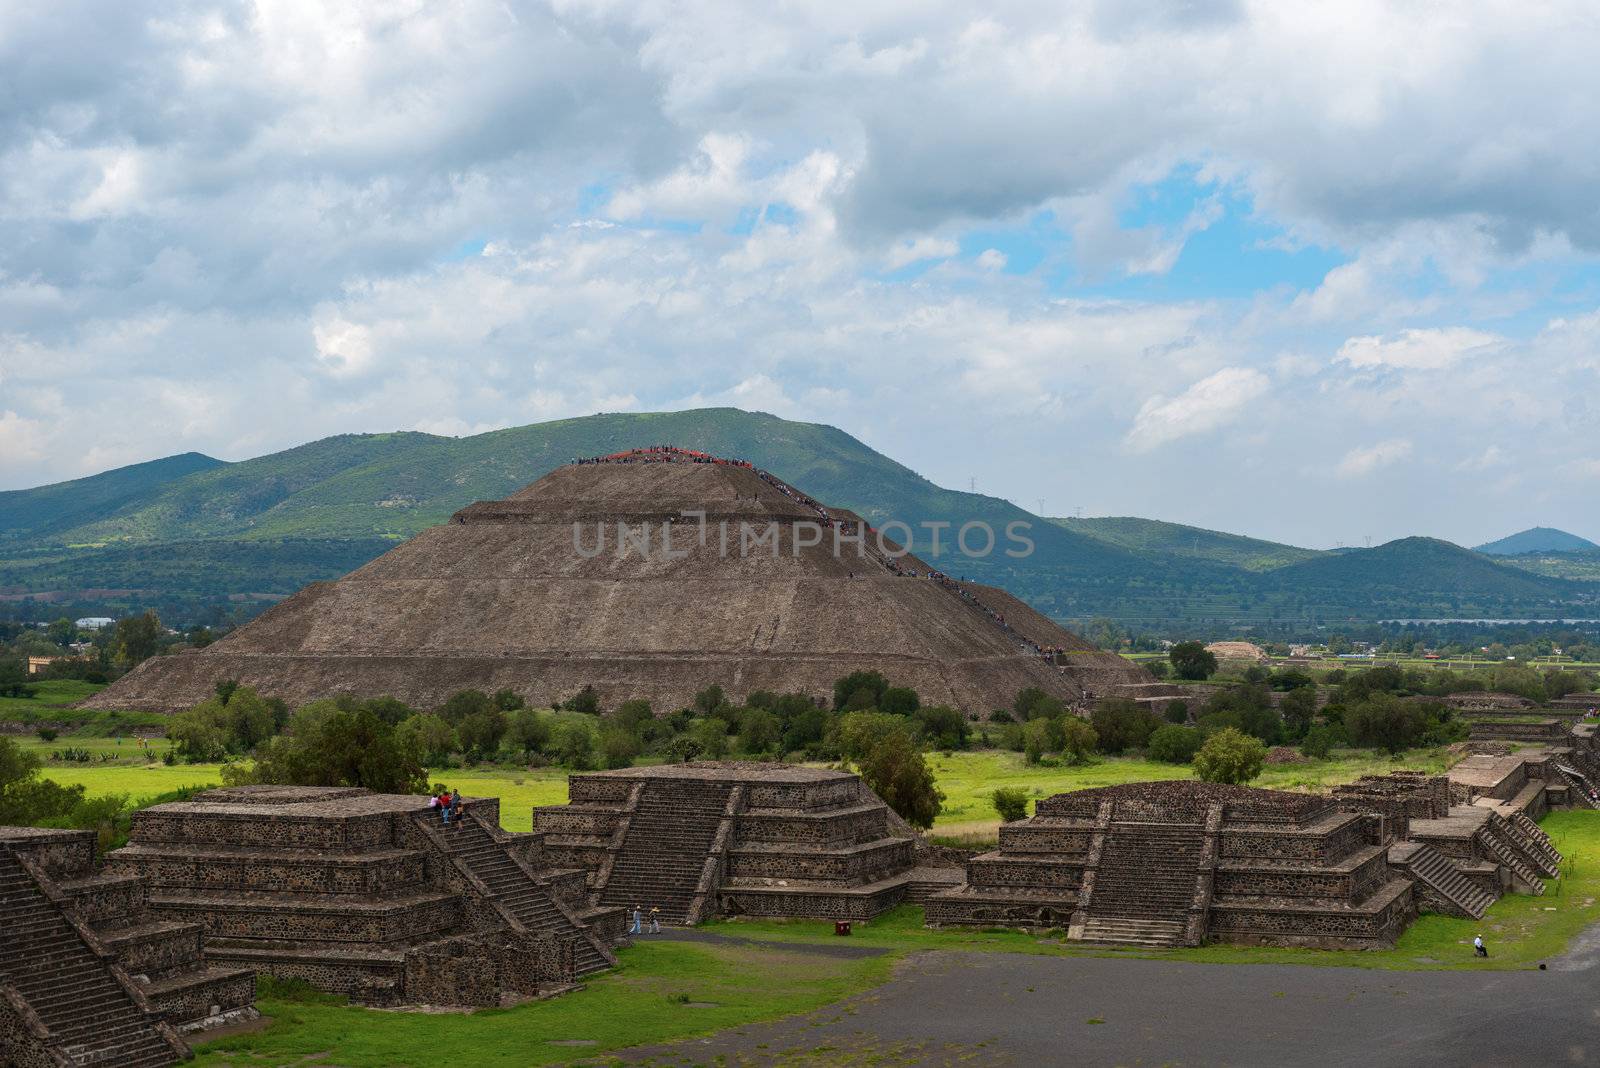 Pyramid of the Sun as viewed from pyramid of the Moon, Mexico by Marcus